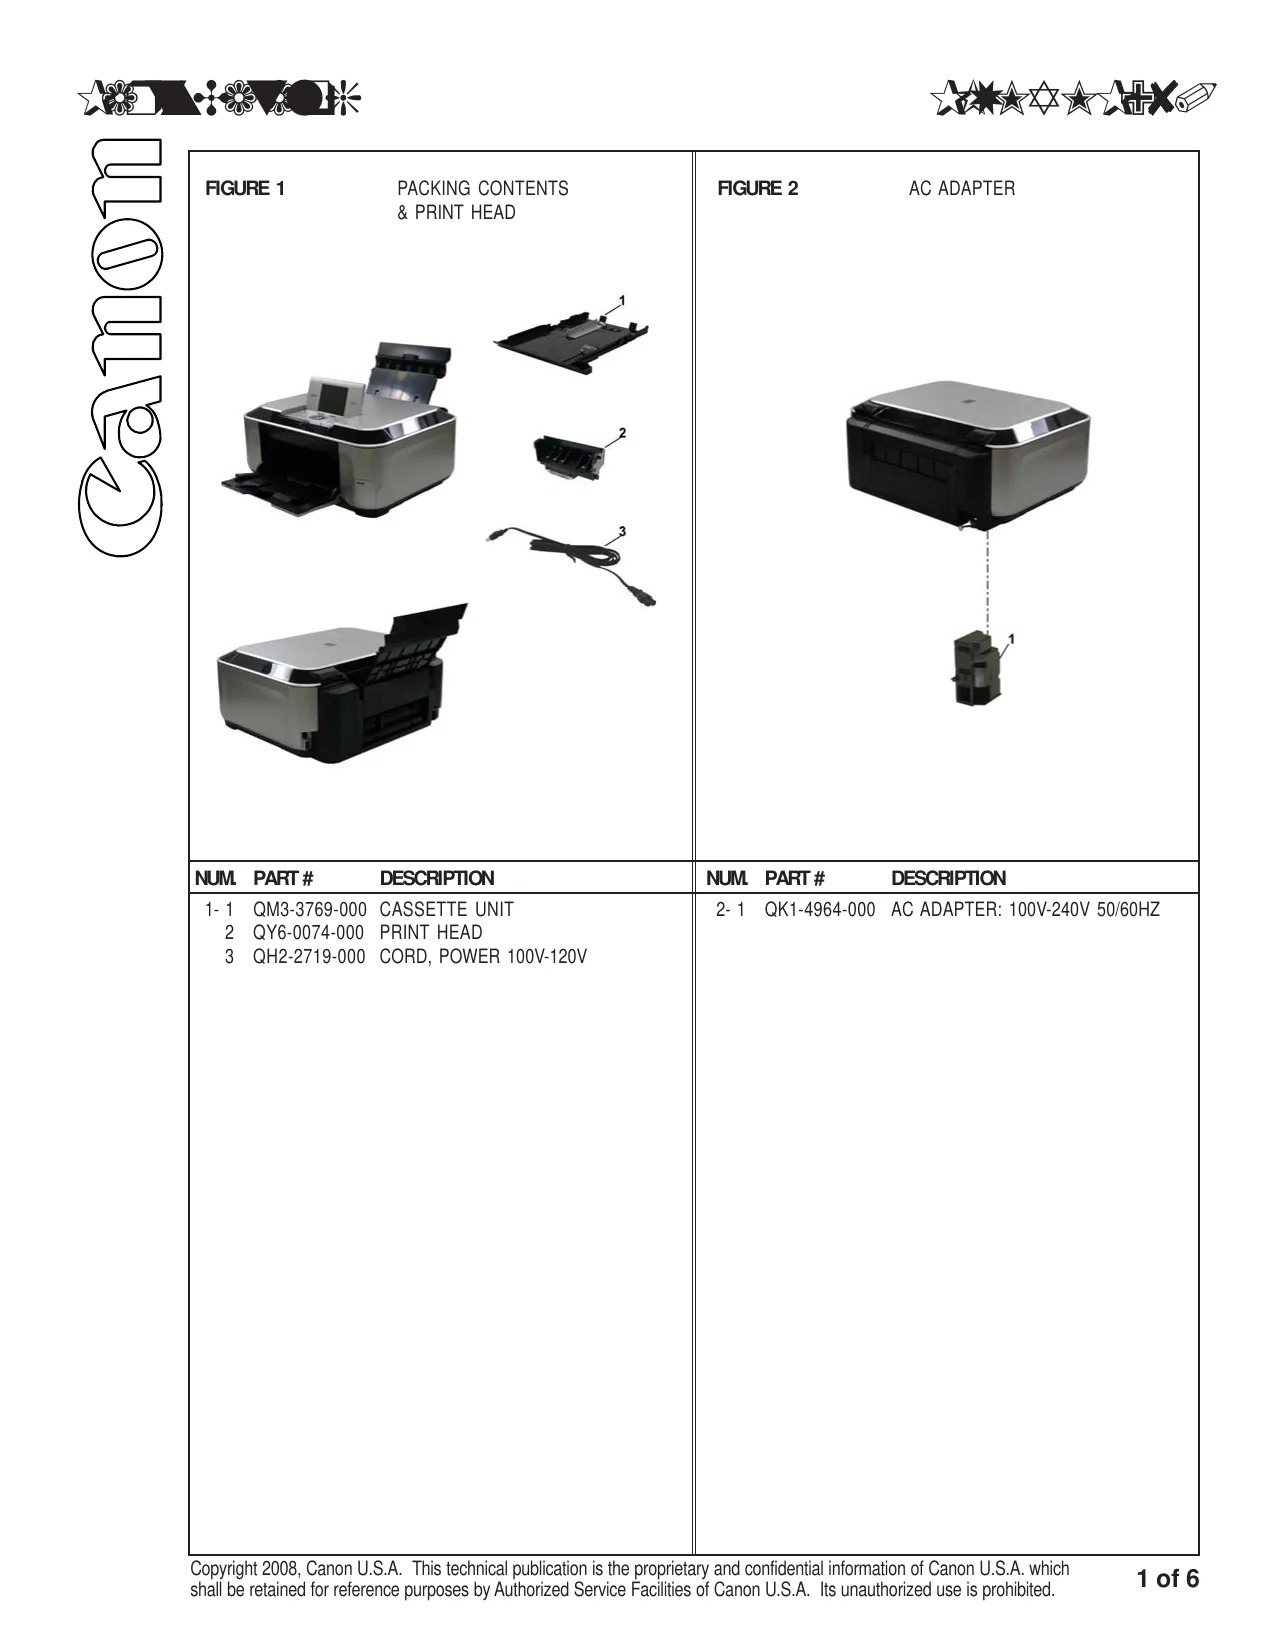 Canon Pixma MP980 multifunction inkjet printer service guide + parts catalog Preview image 2